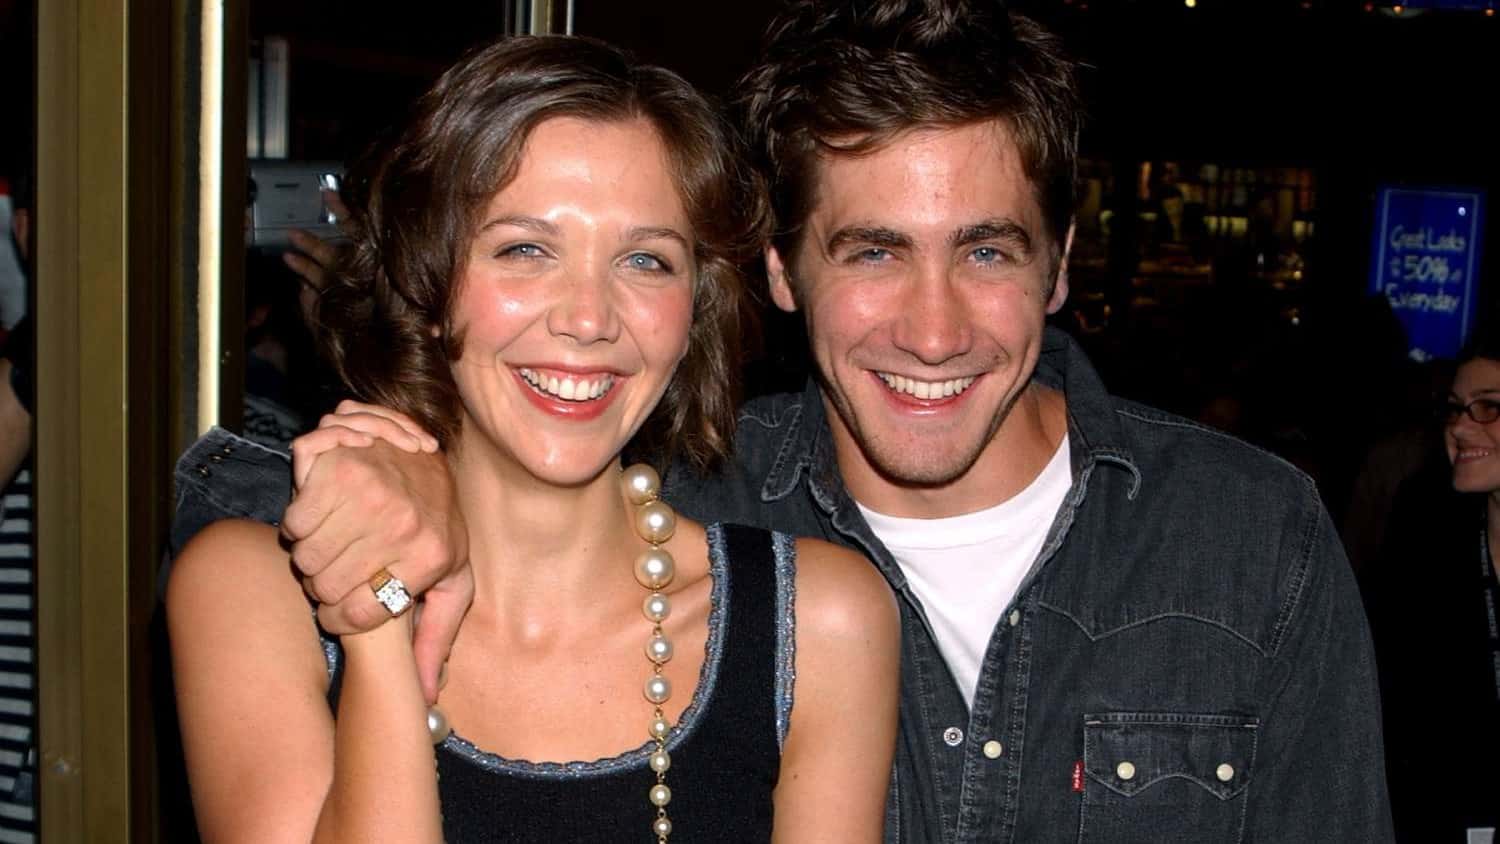 Maggie Gyllenhaal has a younger brother, actor Jake Gyllenhaal